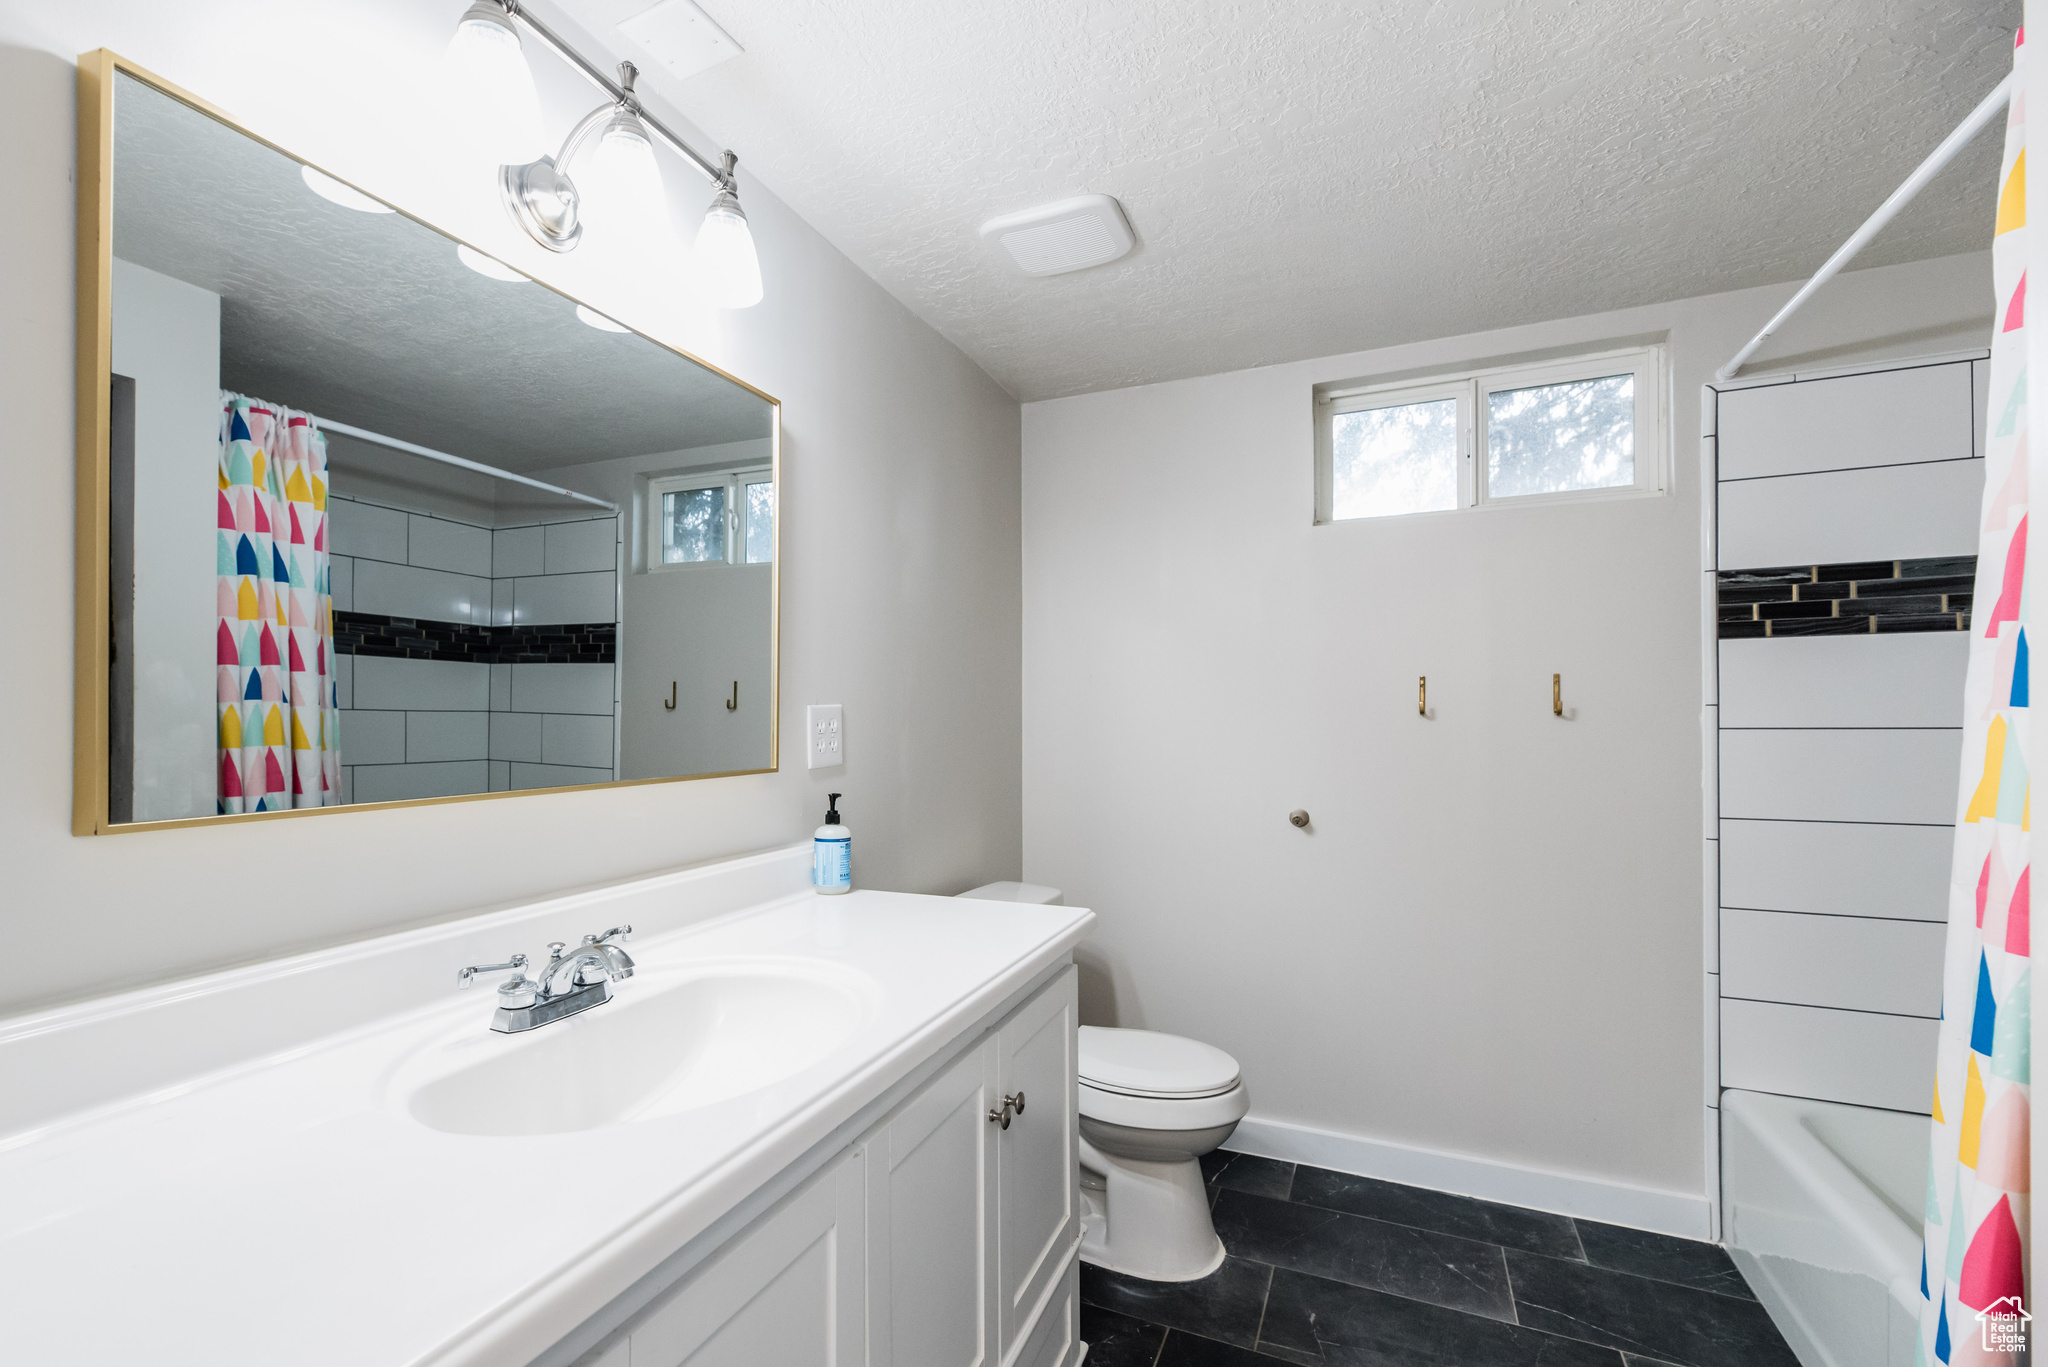 Full bathroom featuring a textured ceiling, shower / tub combo with curtain, tile floors, toilet, and vanity